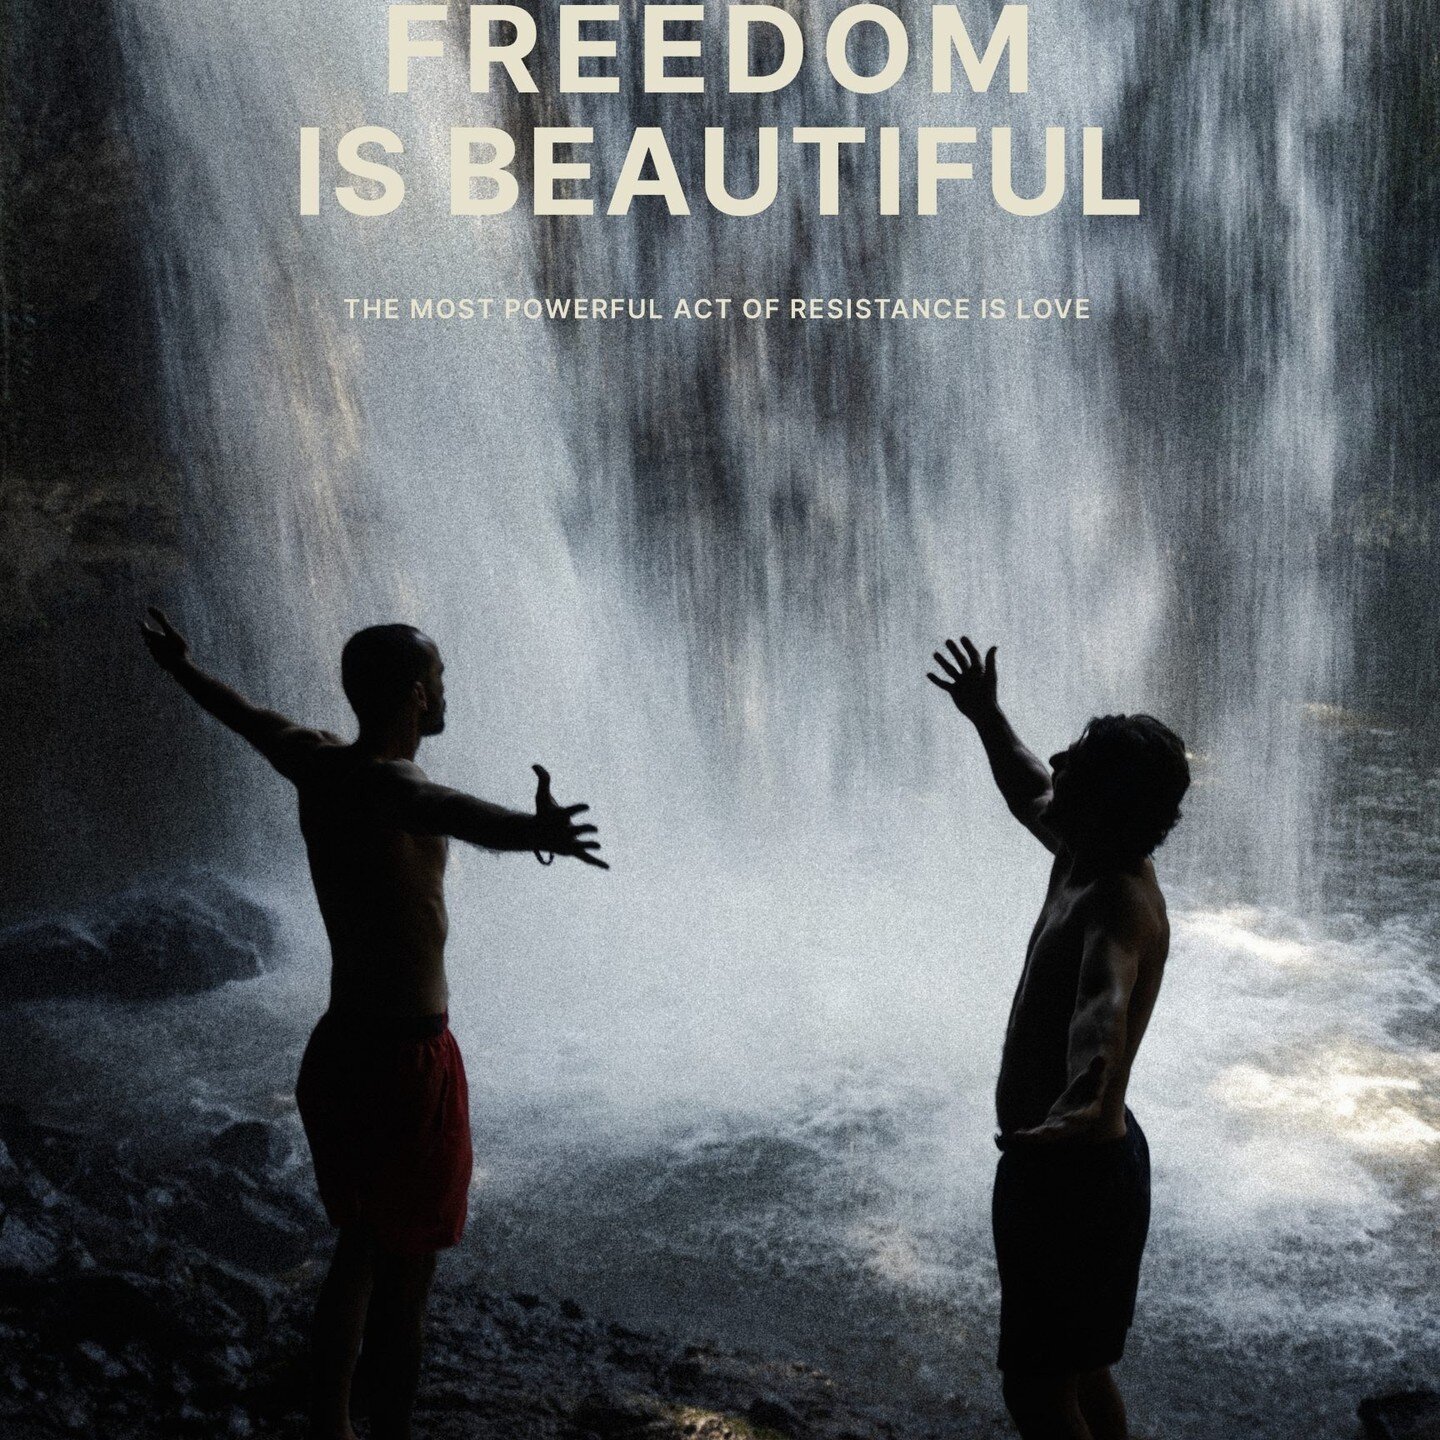 We had the pleasure of working with some amazing people on a really important story. We are thrilled to announce that @freedomisbeautiful.film has won Best Australian Documentary at this year's Melbourne Film Festival. Congratulations to everyone who